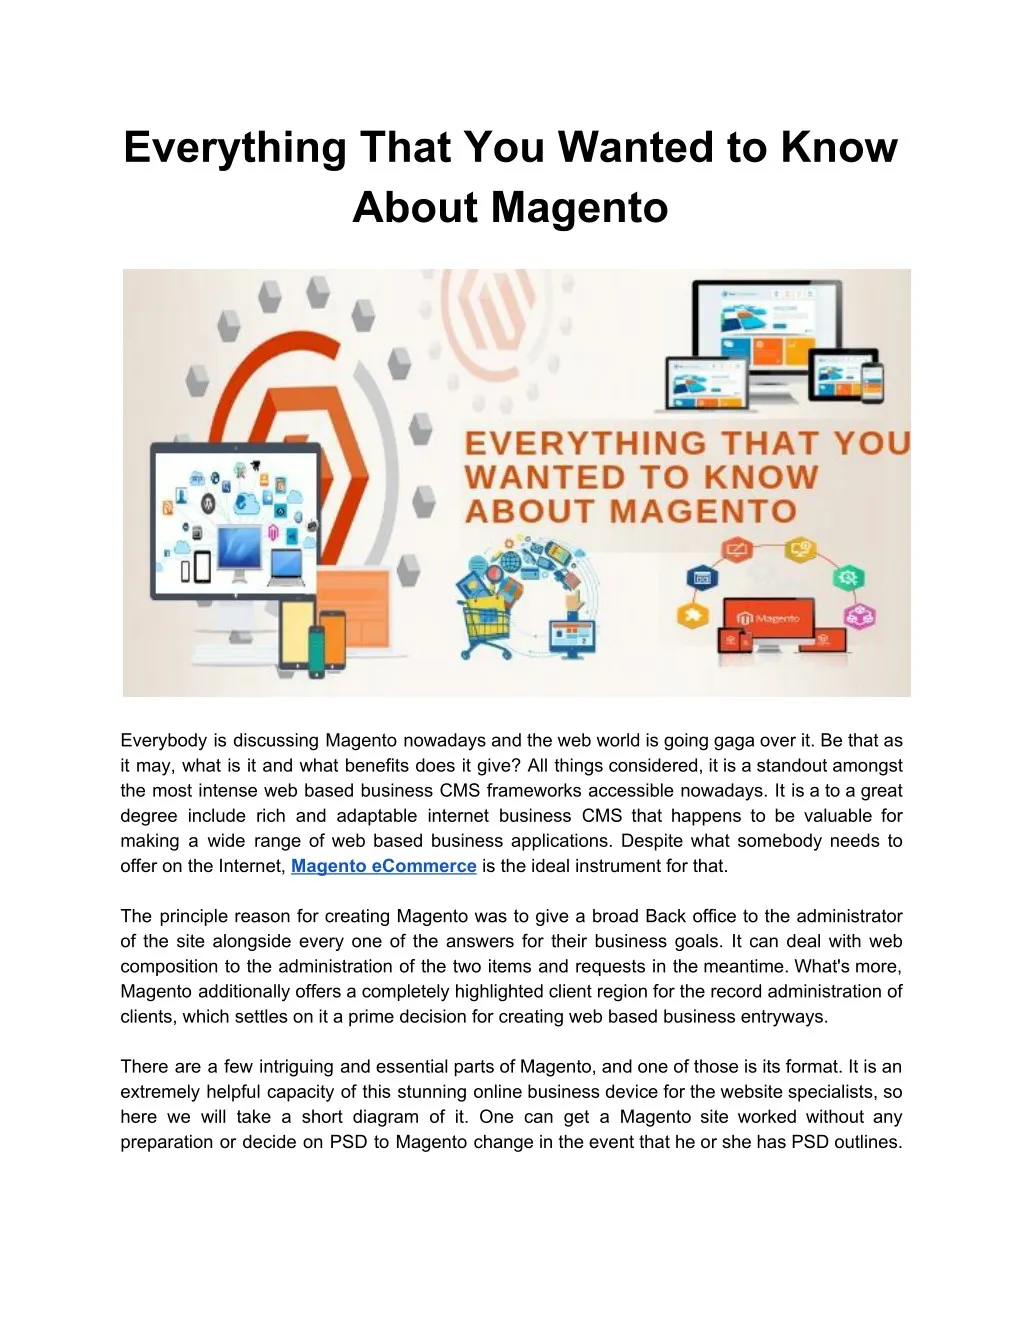 everything that you wanted to know about magento